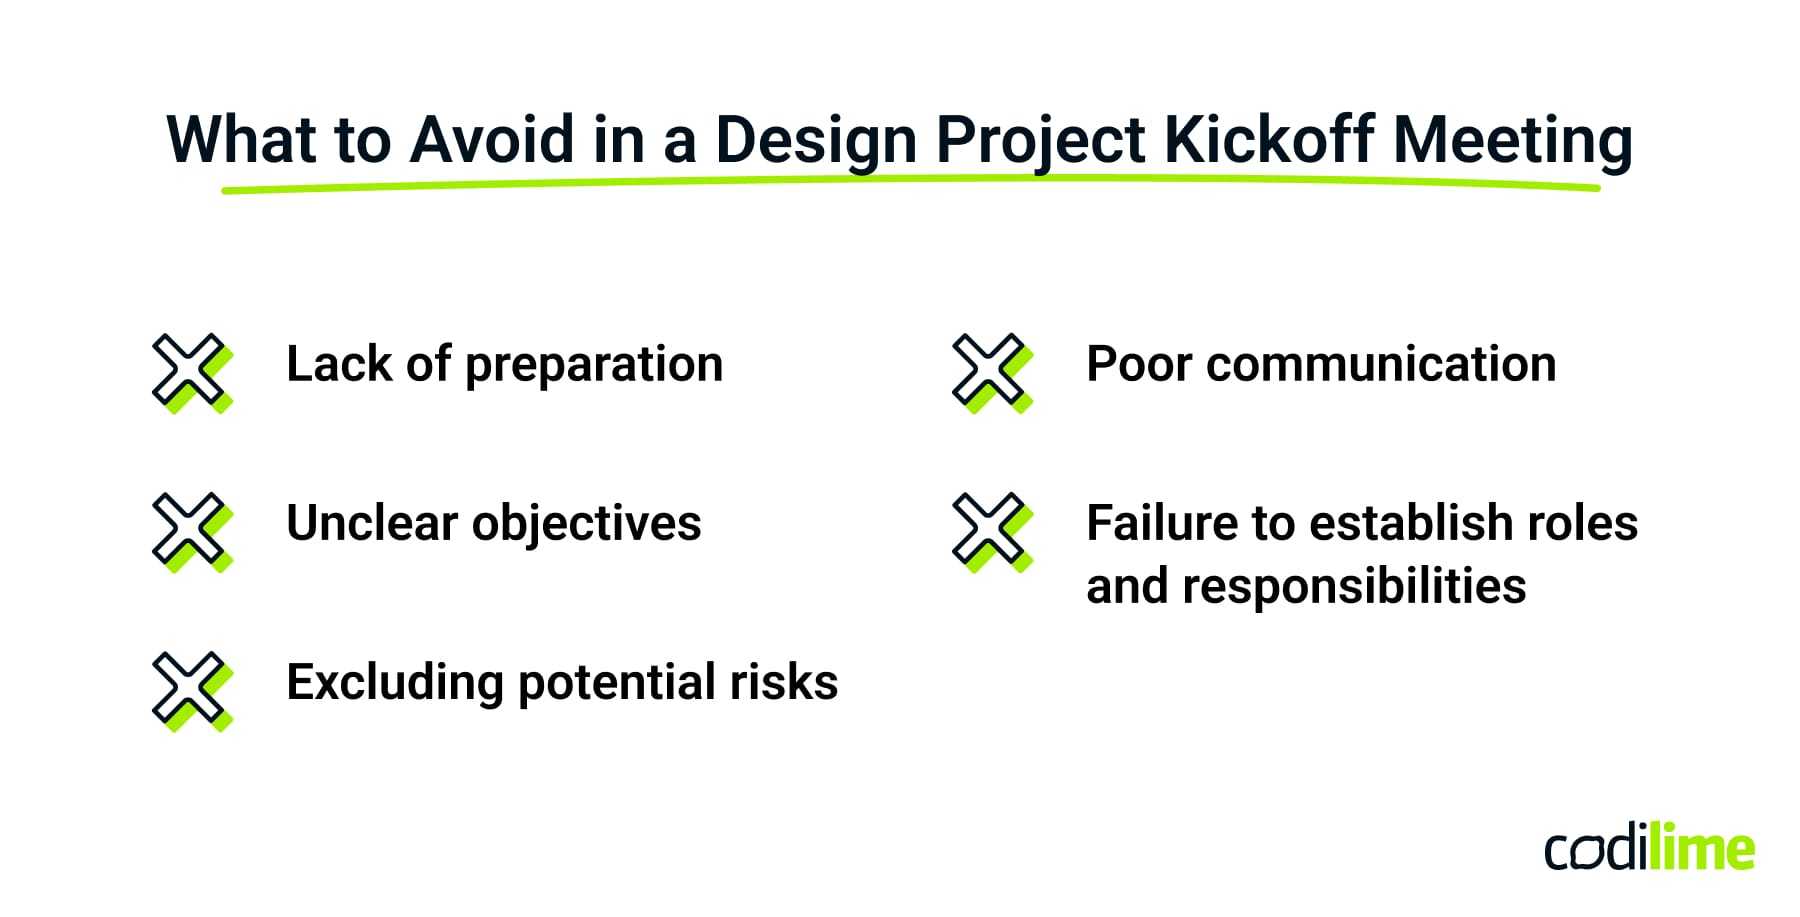 What to avoid in a Design Project Kickoff Meeting